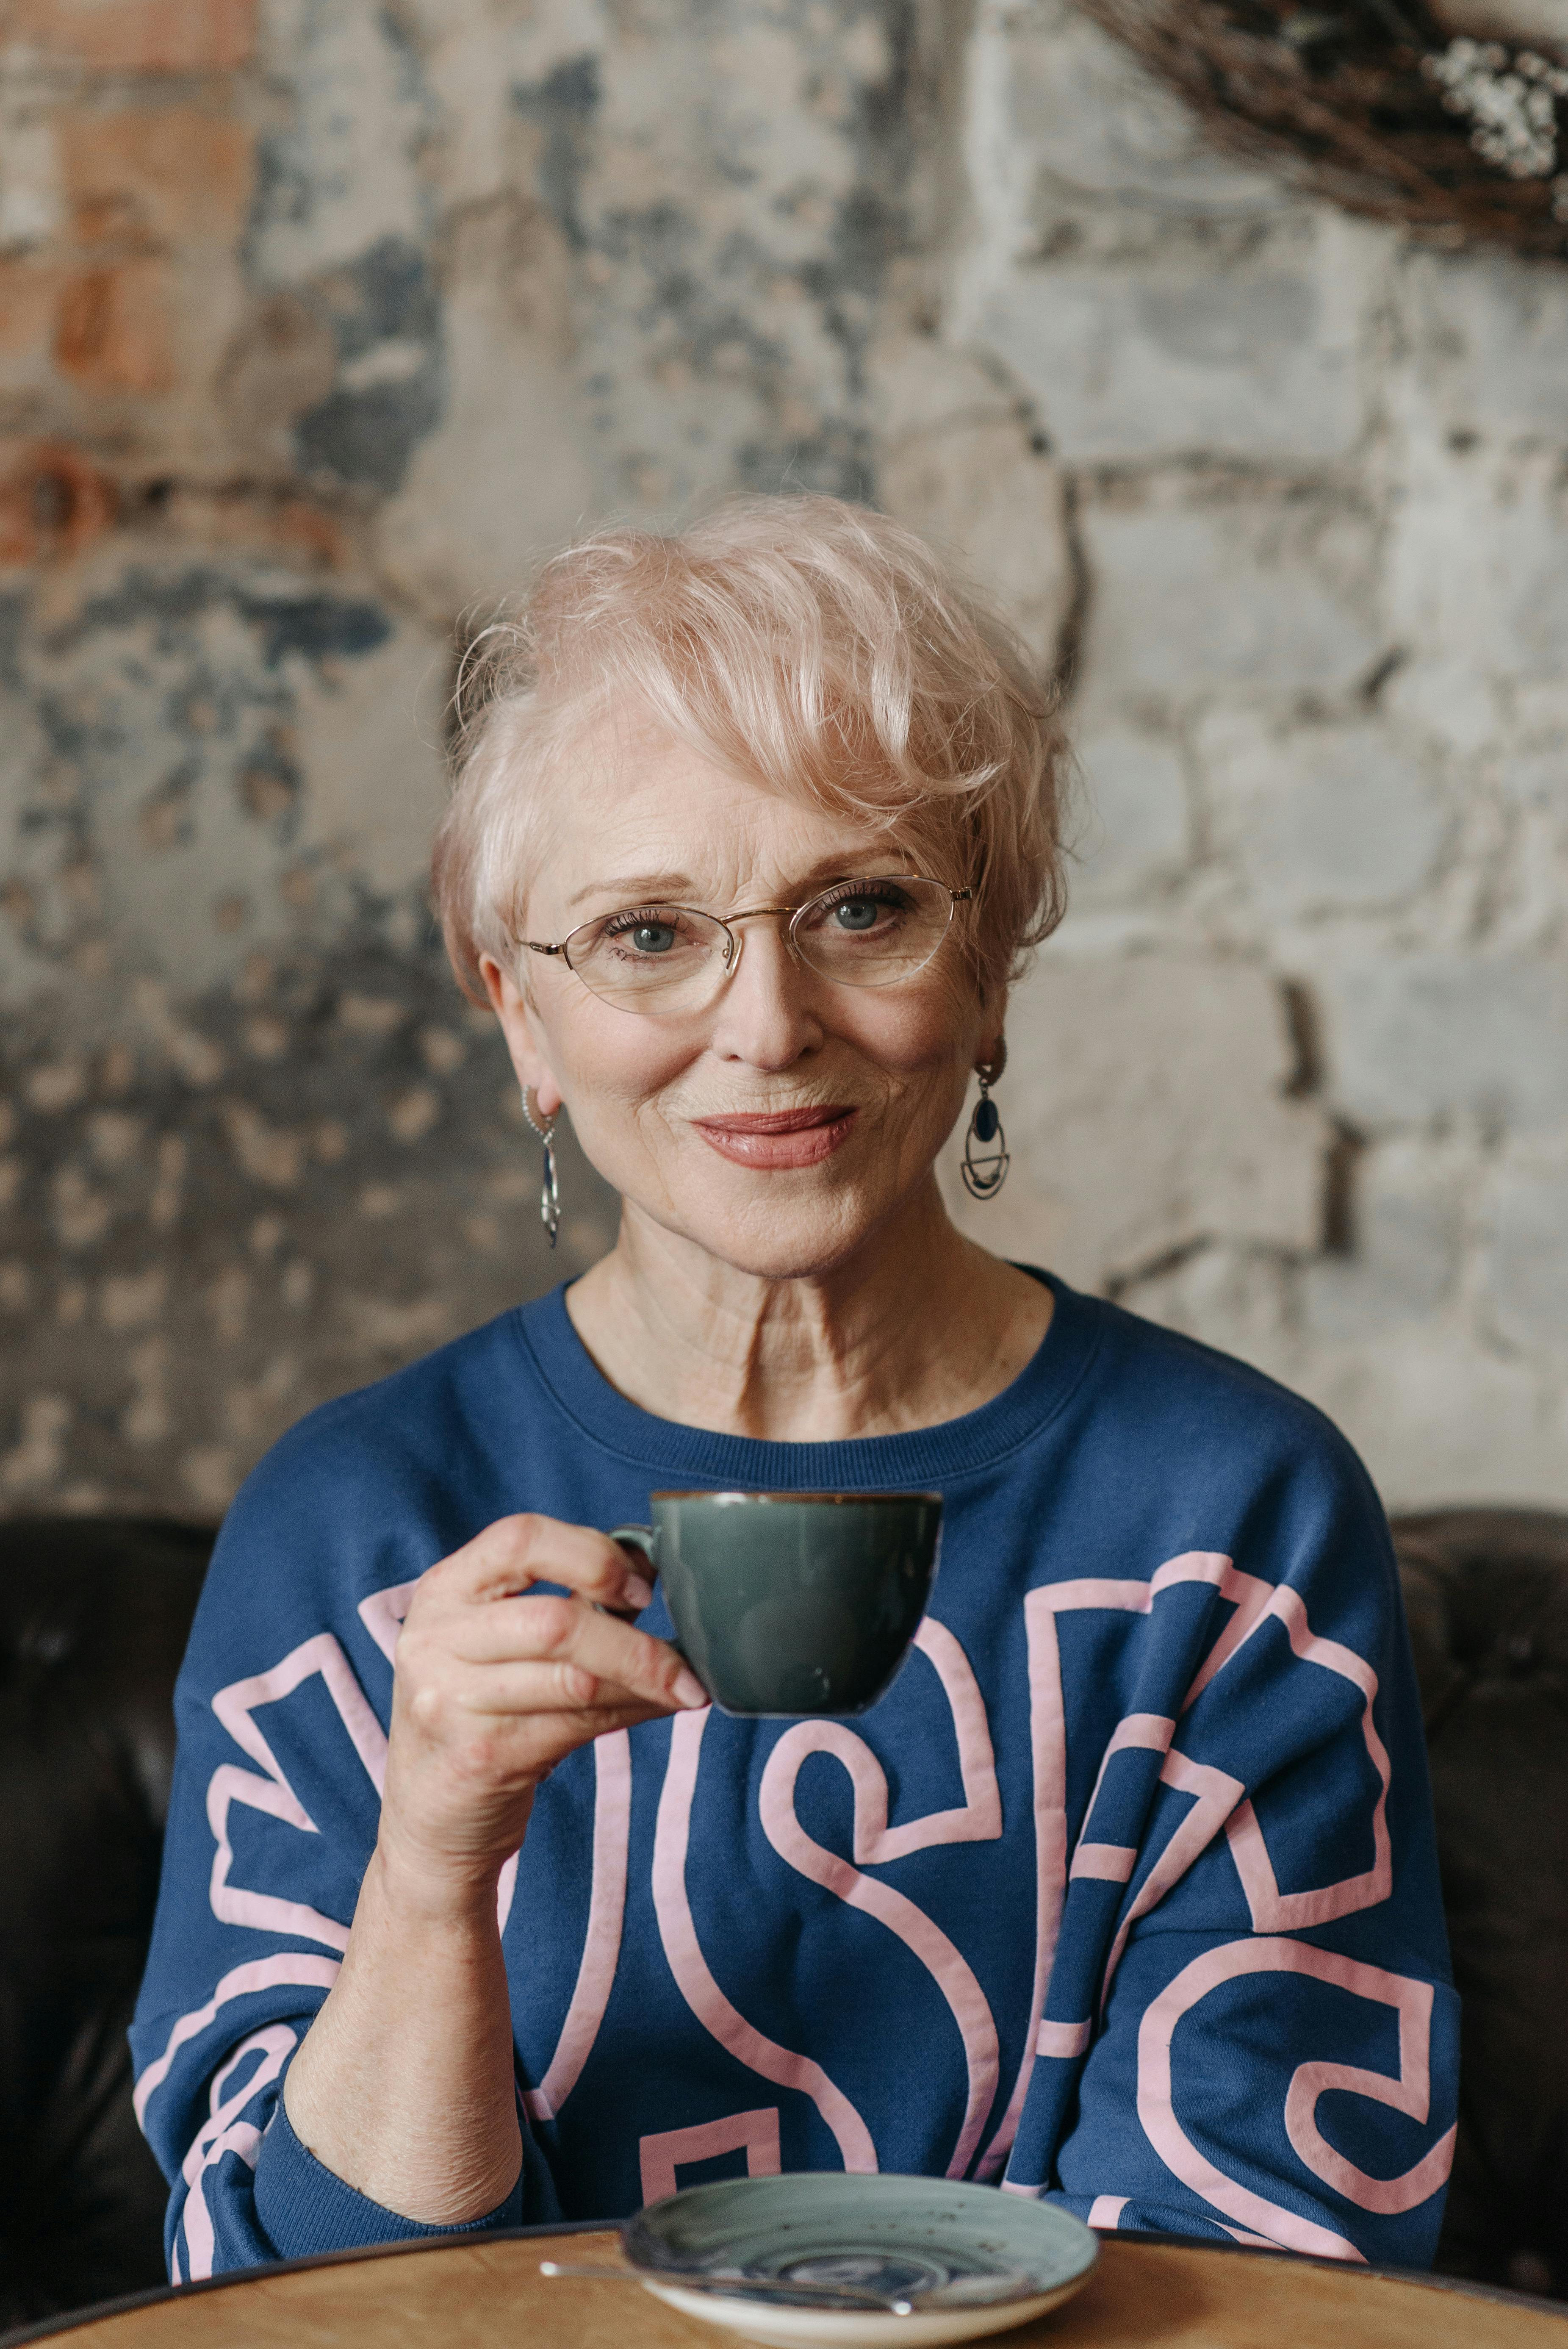 A smiling elderly woman holding a cup | Source: Pexels